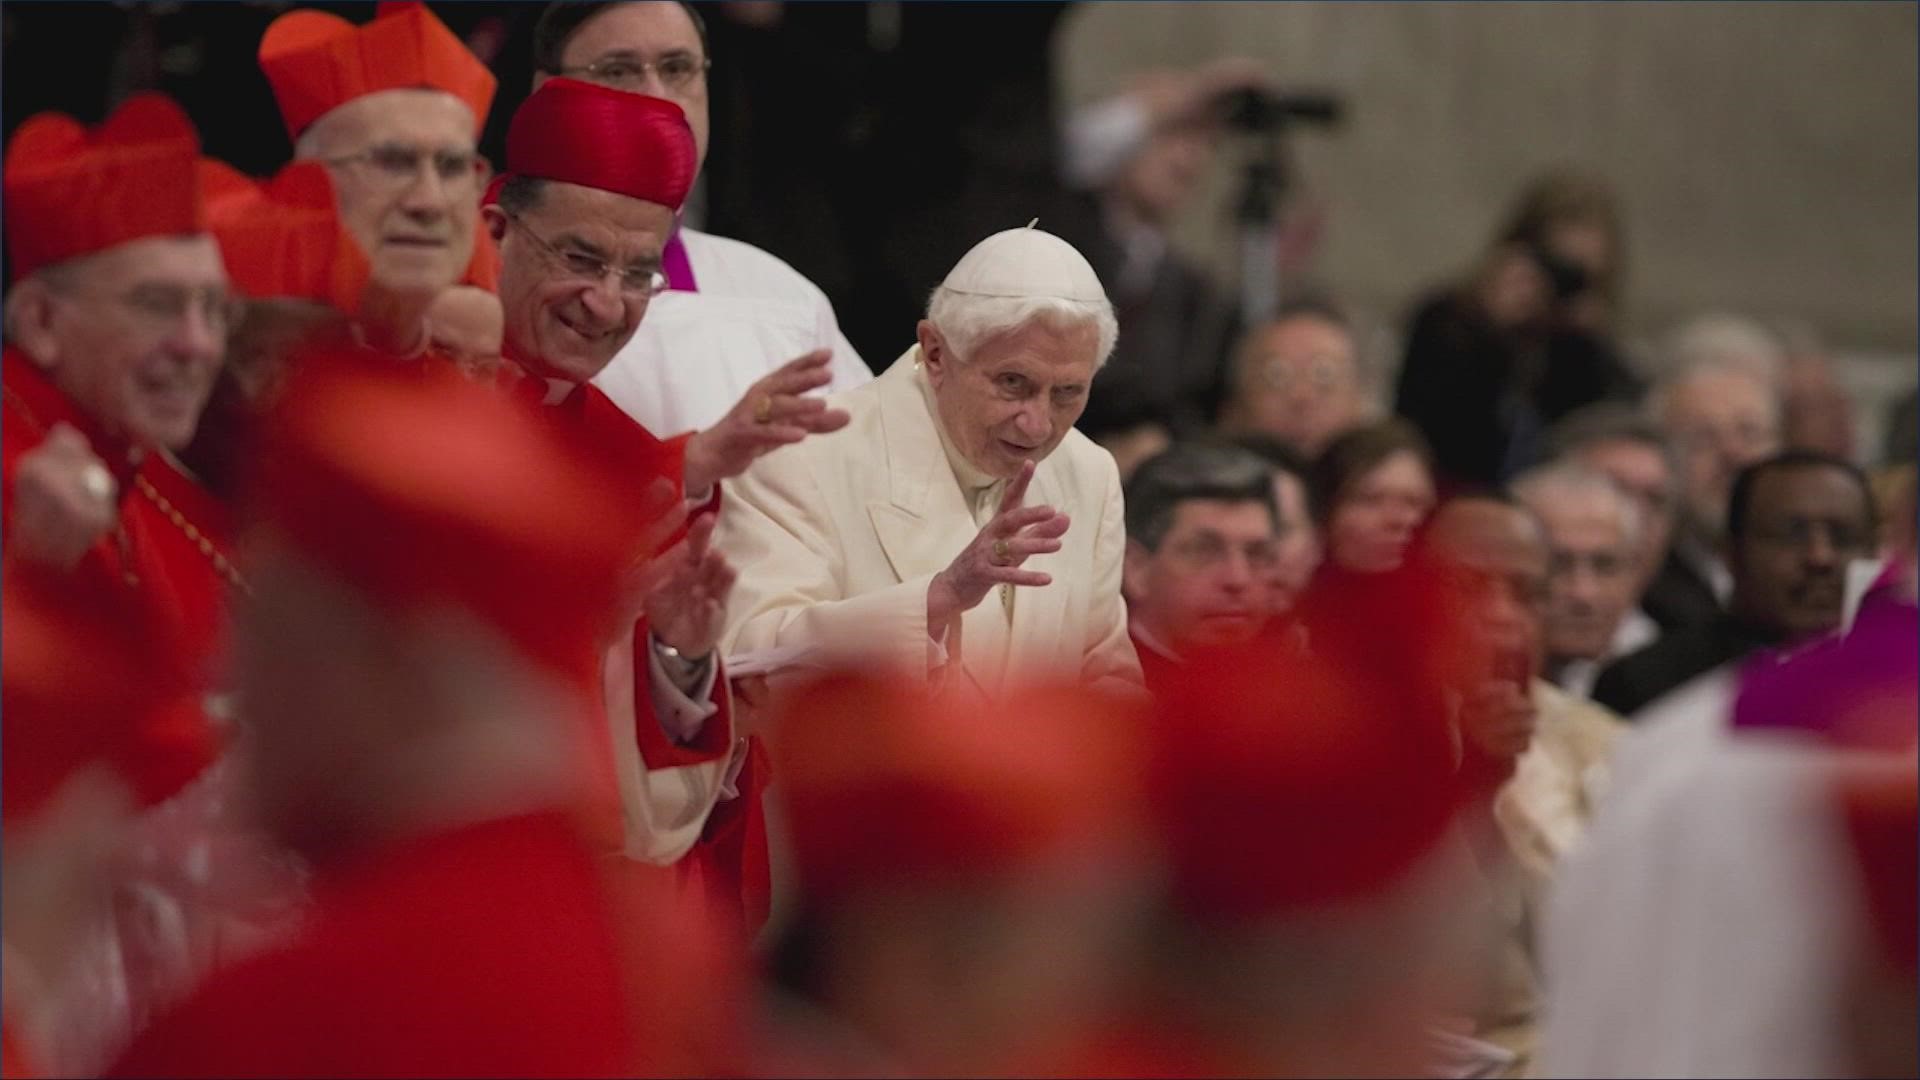 The Catholic Diocese of Dallas is planning a rosary vigil and memorial Mass for Pope Emeritus Benedict XVI, lead by Bishop Burns and Bishop Kelly.